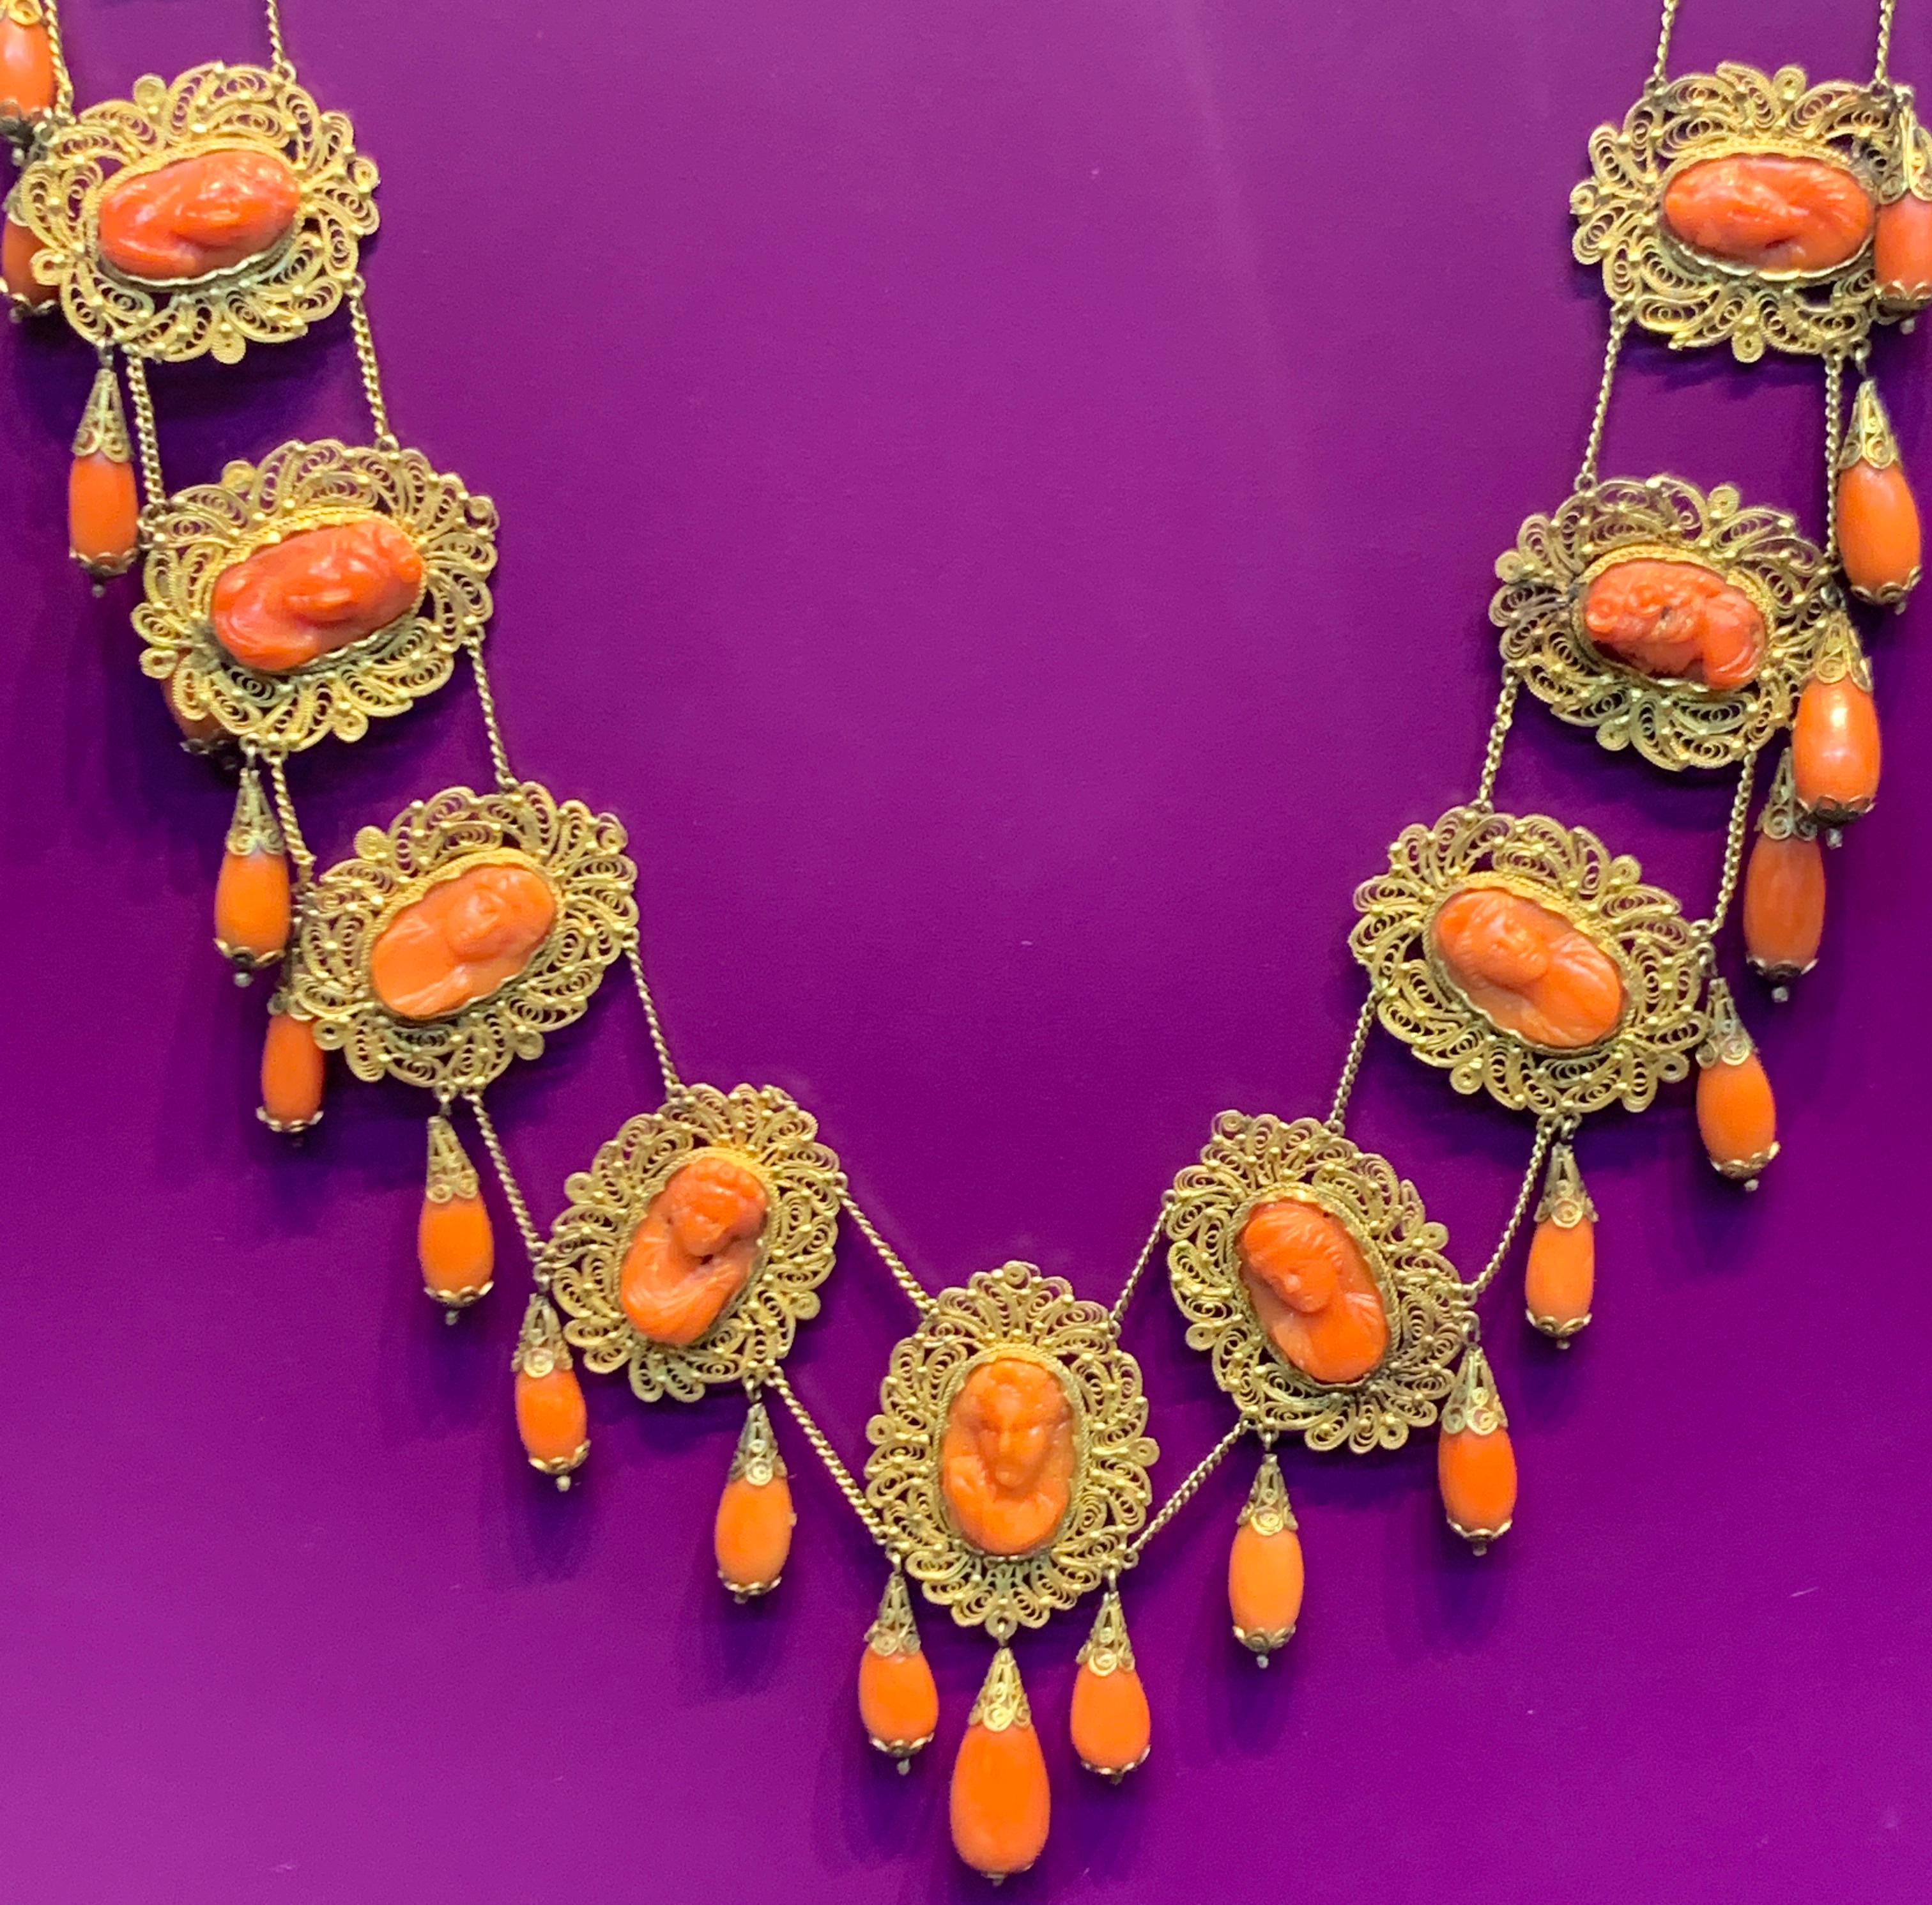  Victorian Coral & Gold  Cameo Drop Necklace, made circa 1900 ,14K Yellow Gold including 14 coral cameo's & 27 coral drops 
66.5 grams
Measurements: 19